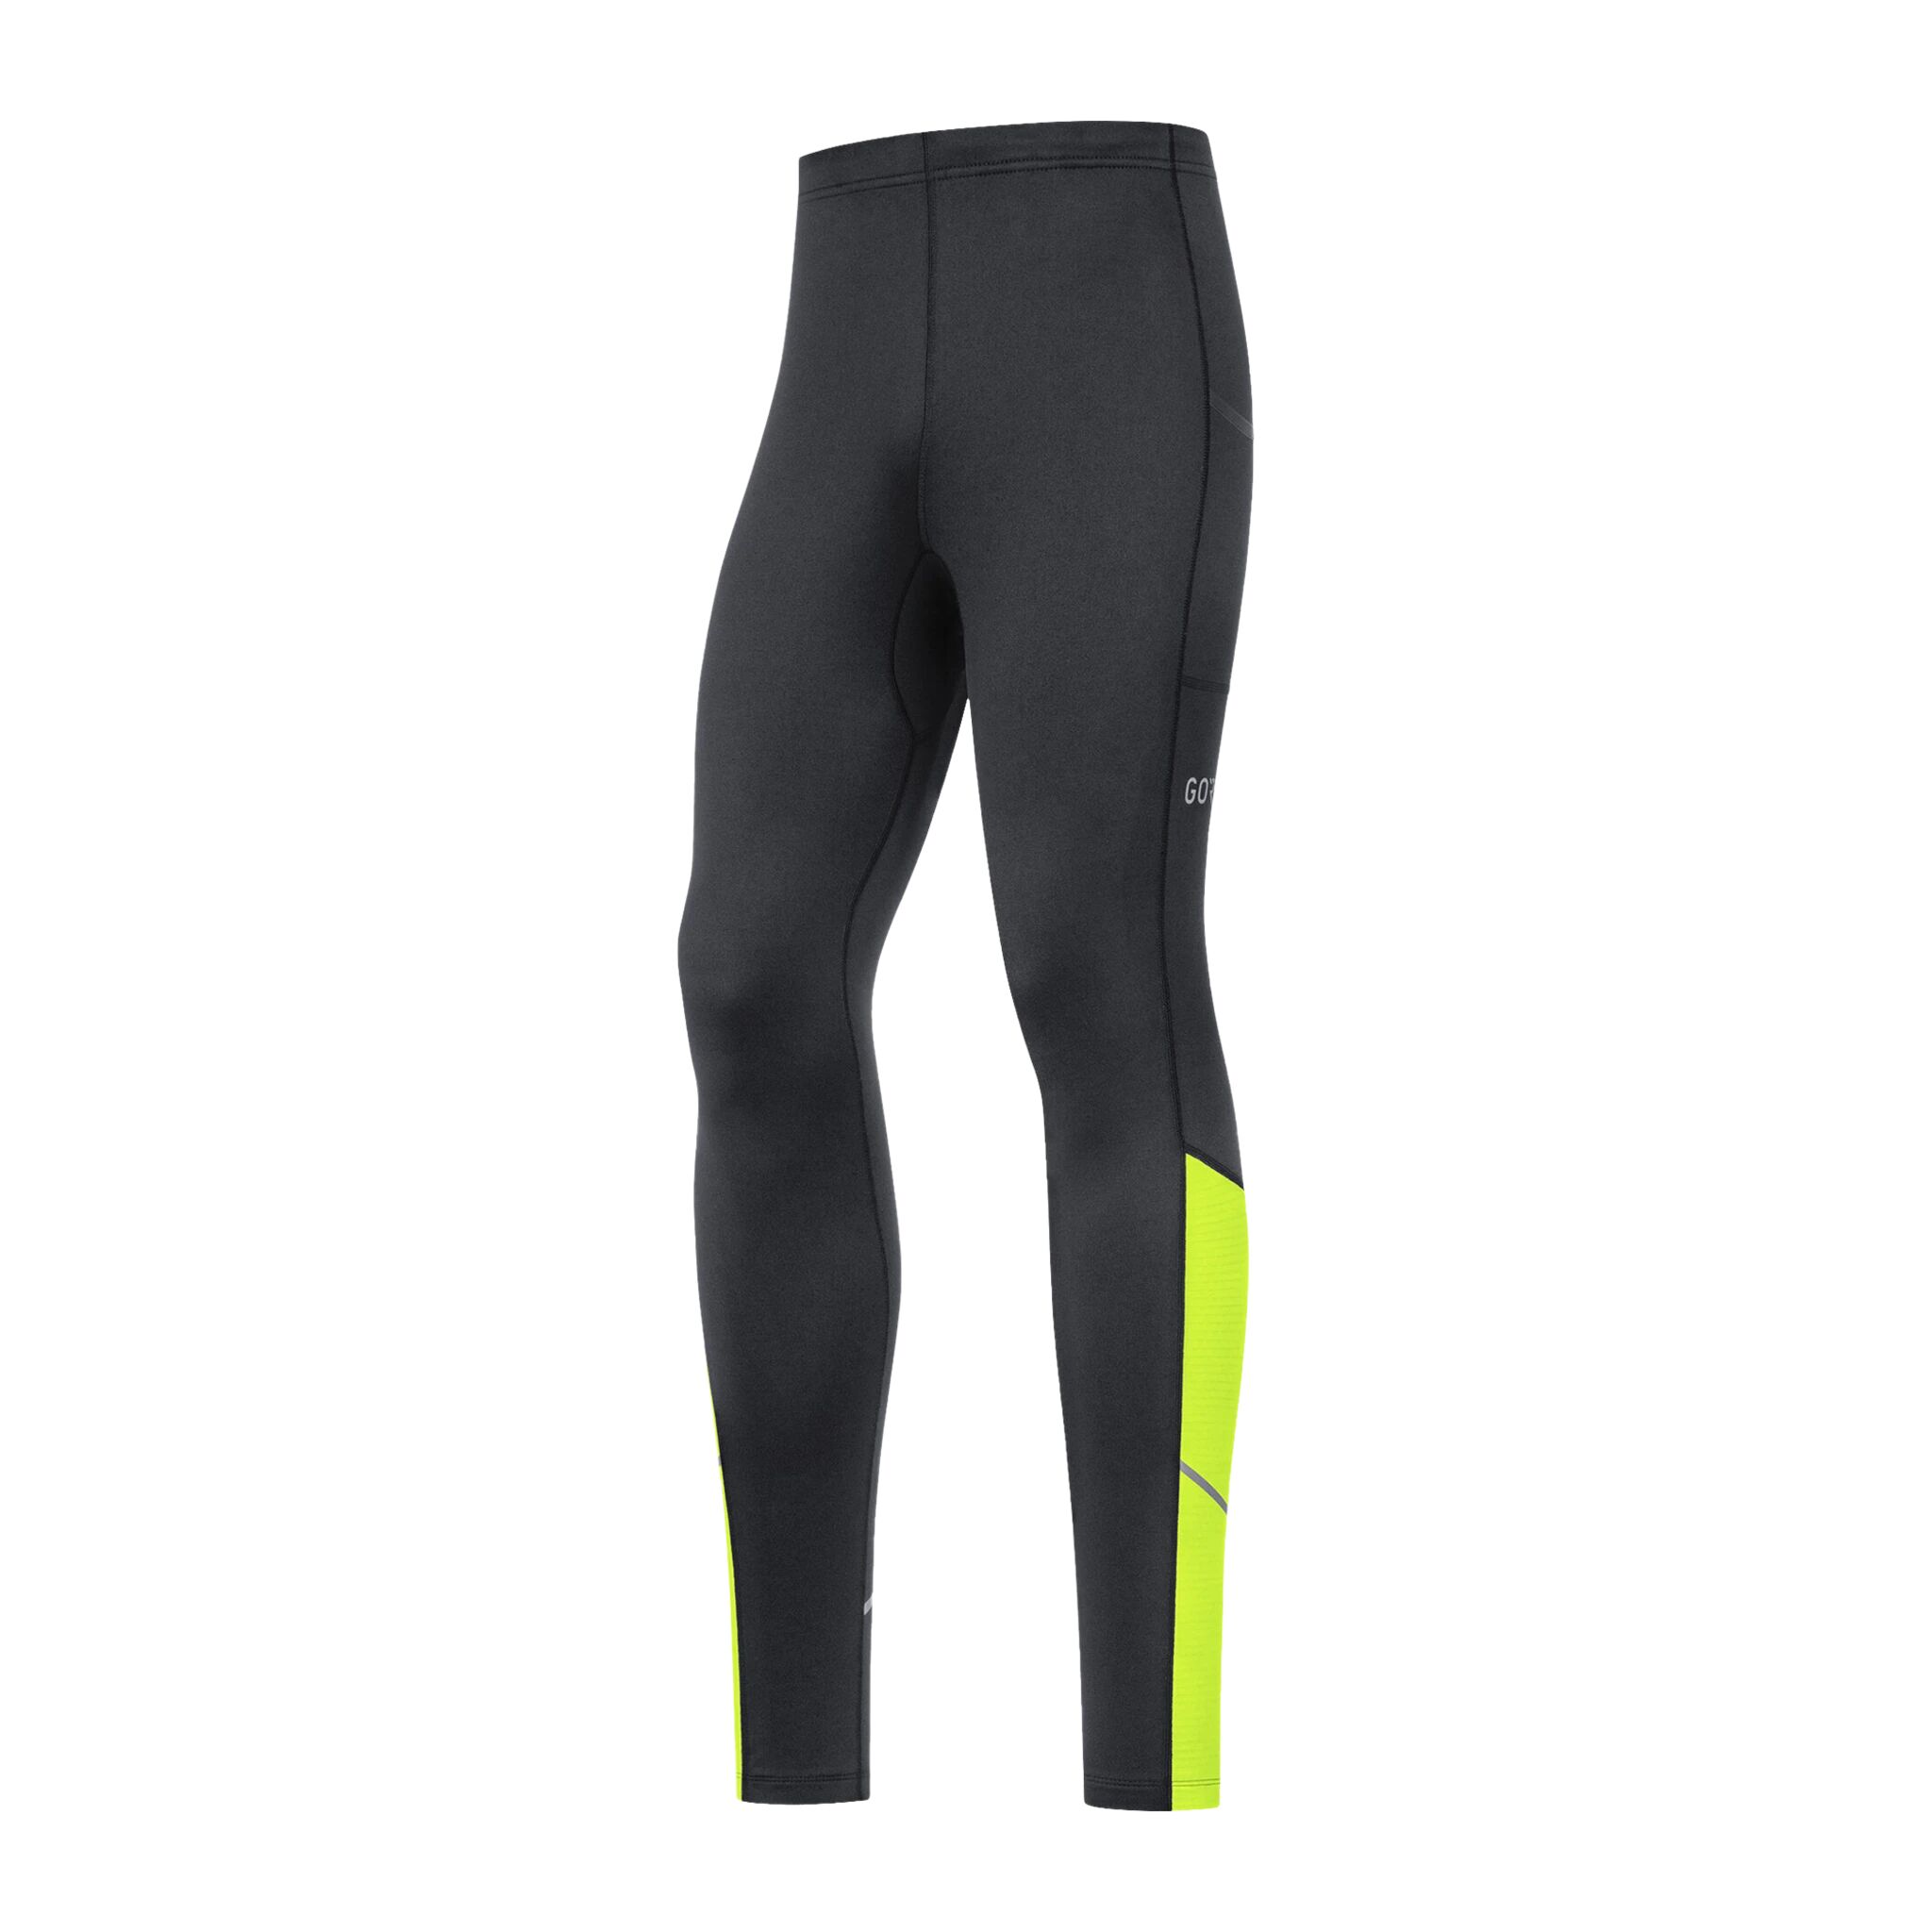 GORE Wear Tights R3 Thermo, tights herre S black/neon yellow